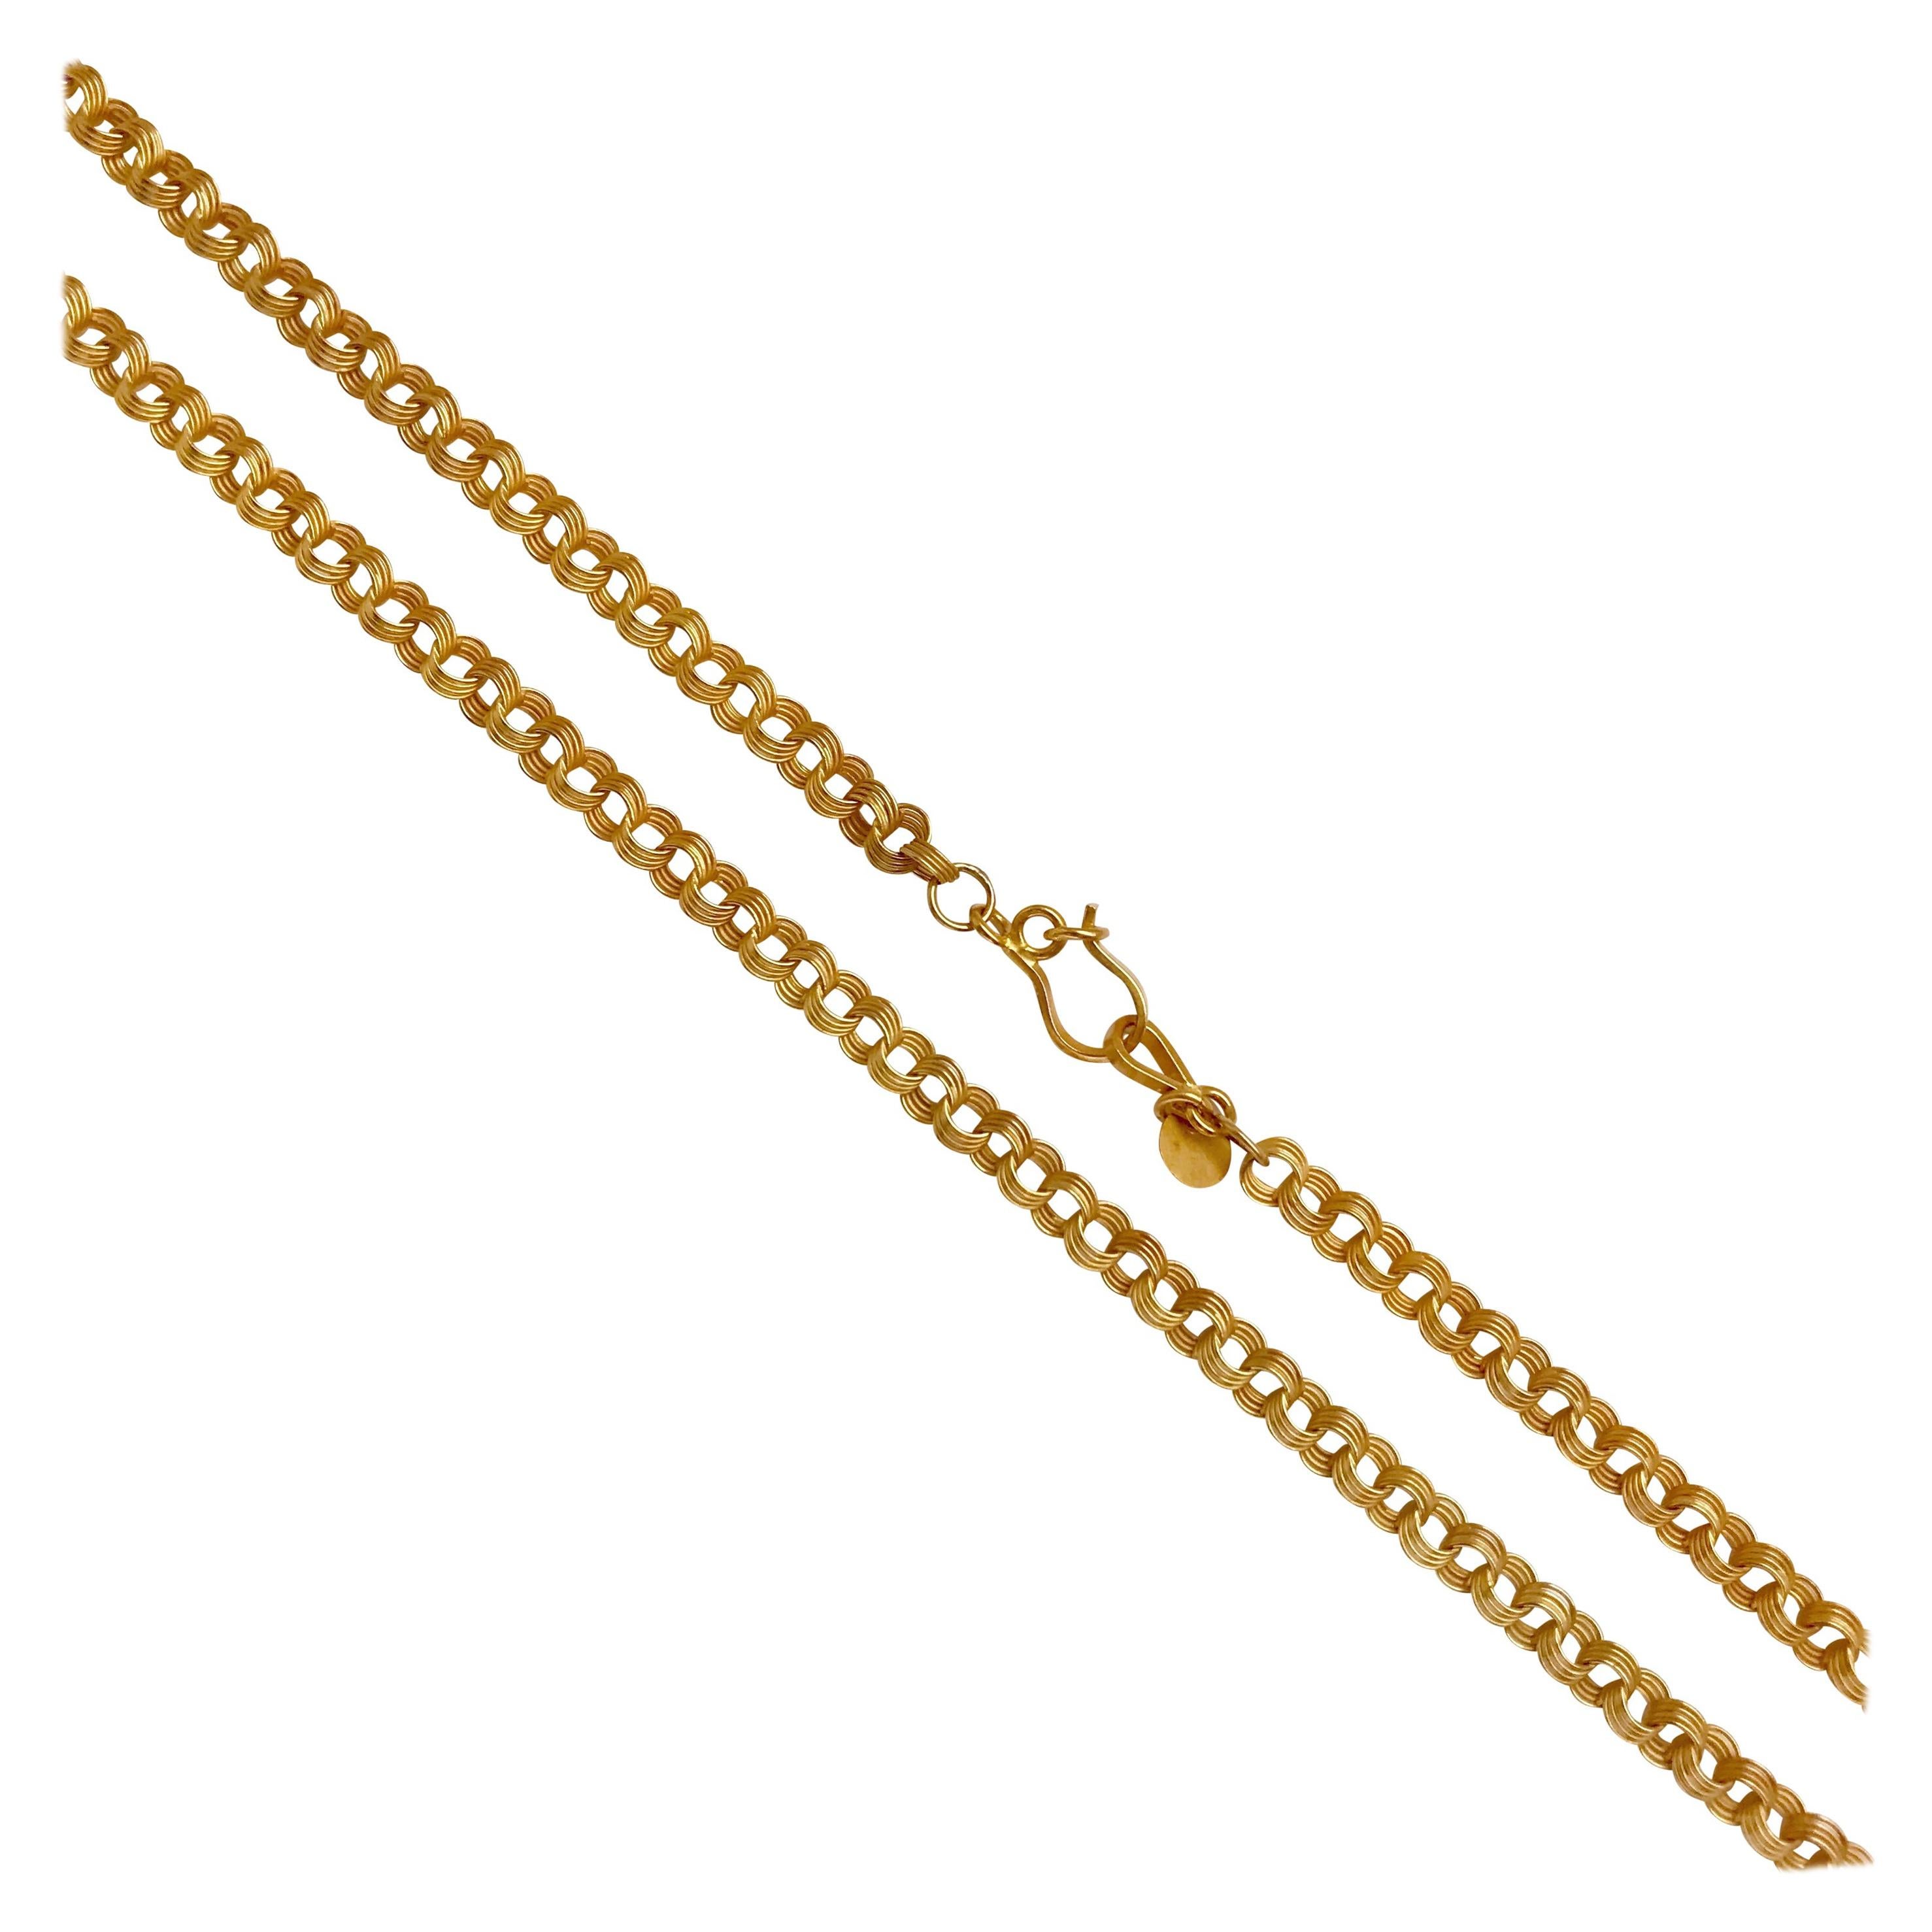 Handmade 18 Karat Solid Yellow Gold Satin Finish Link Chain Necklace For Sale